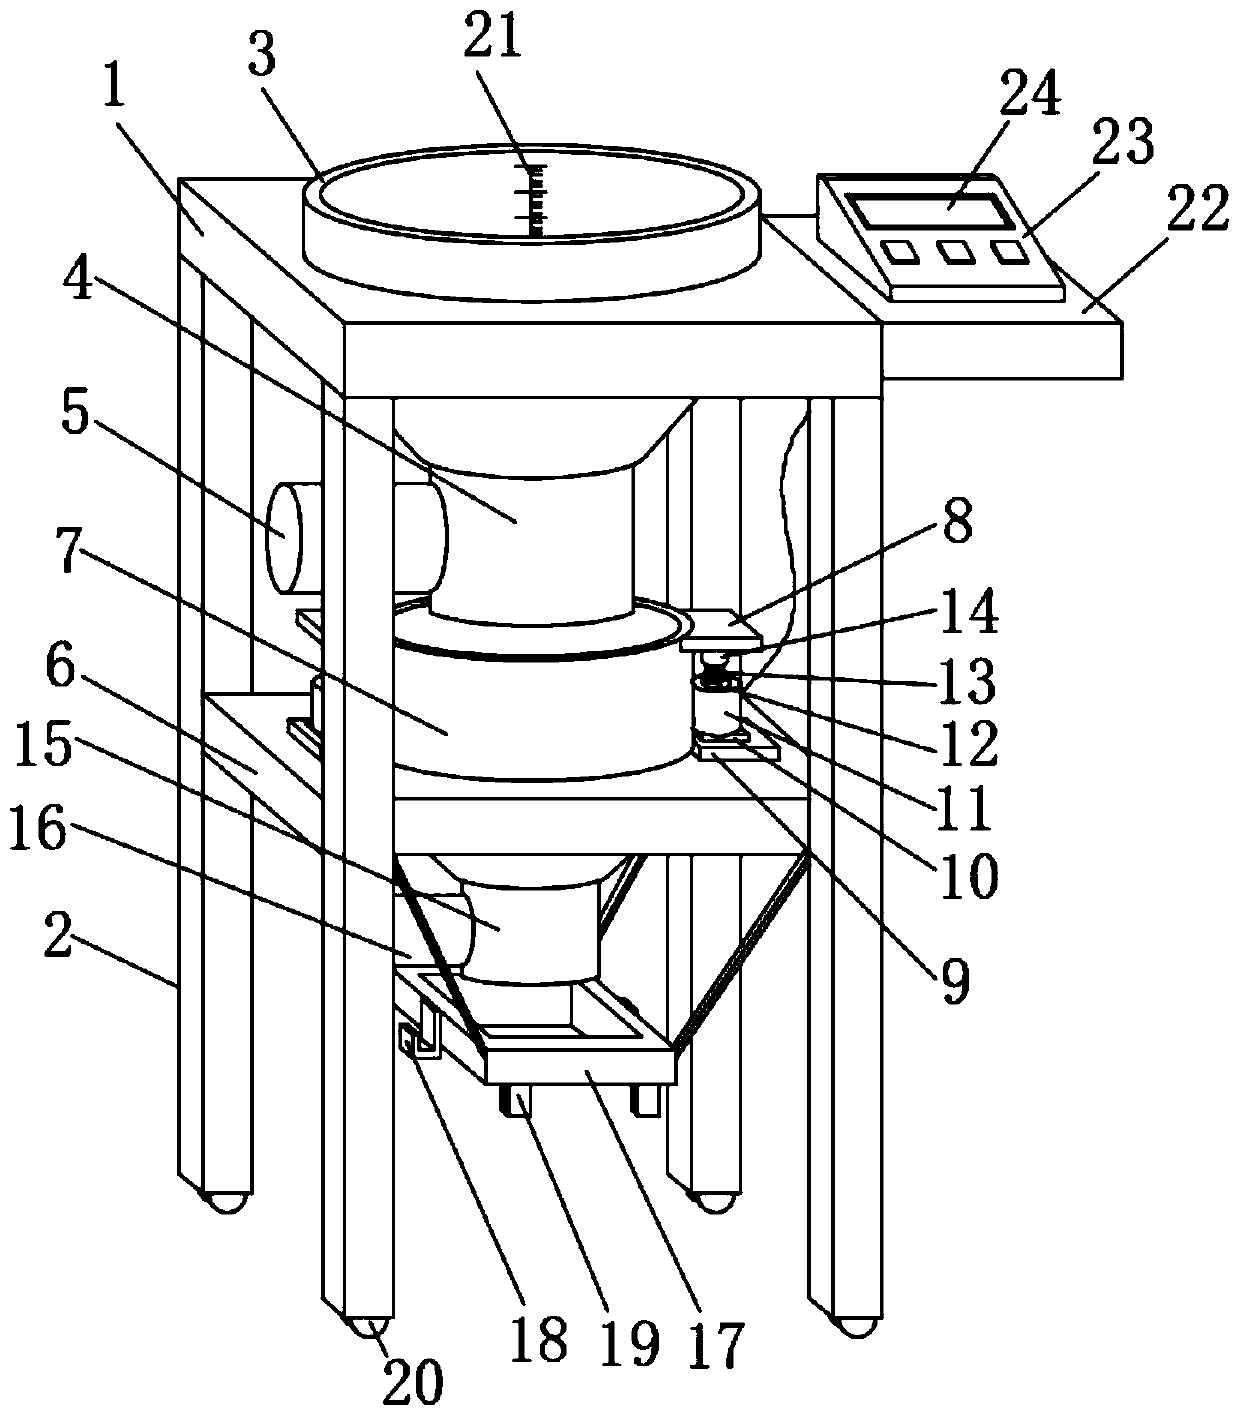 Agricultural product marketing weighing device